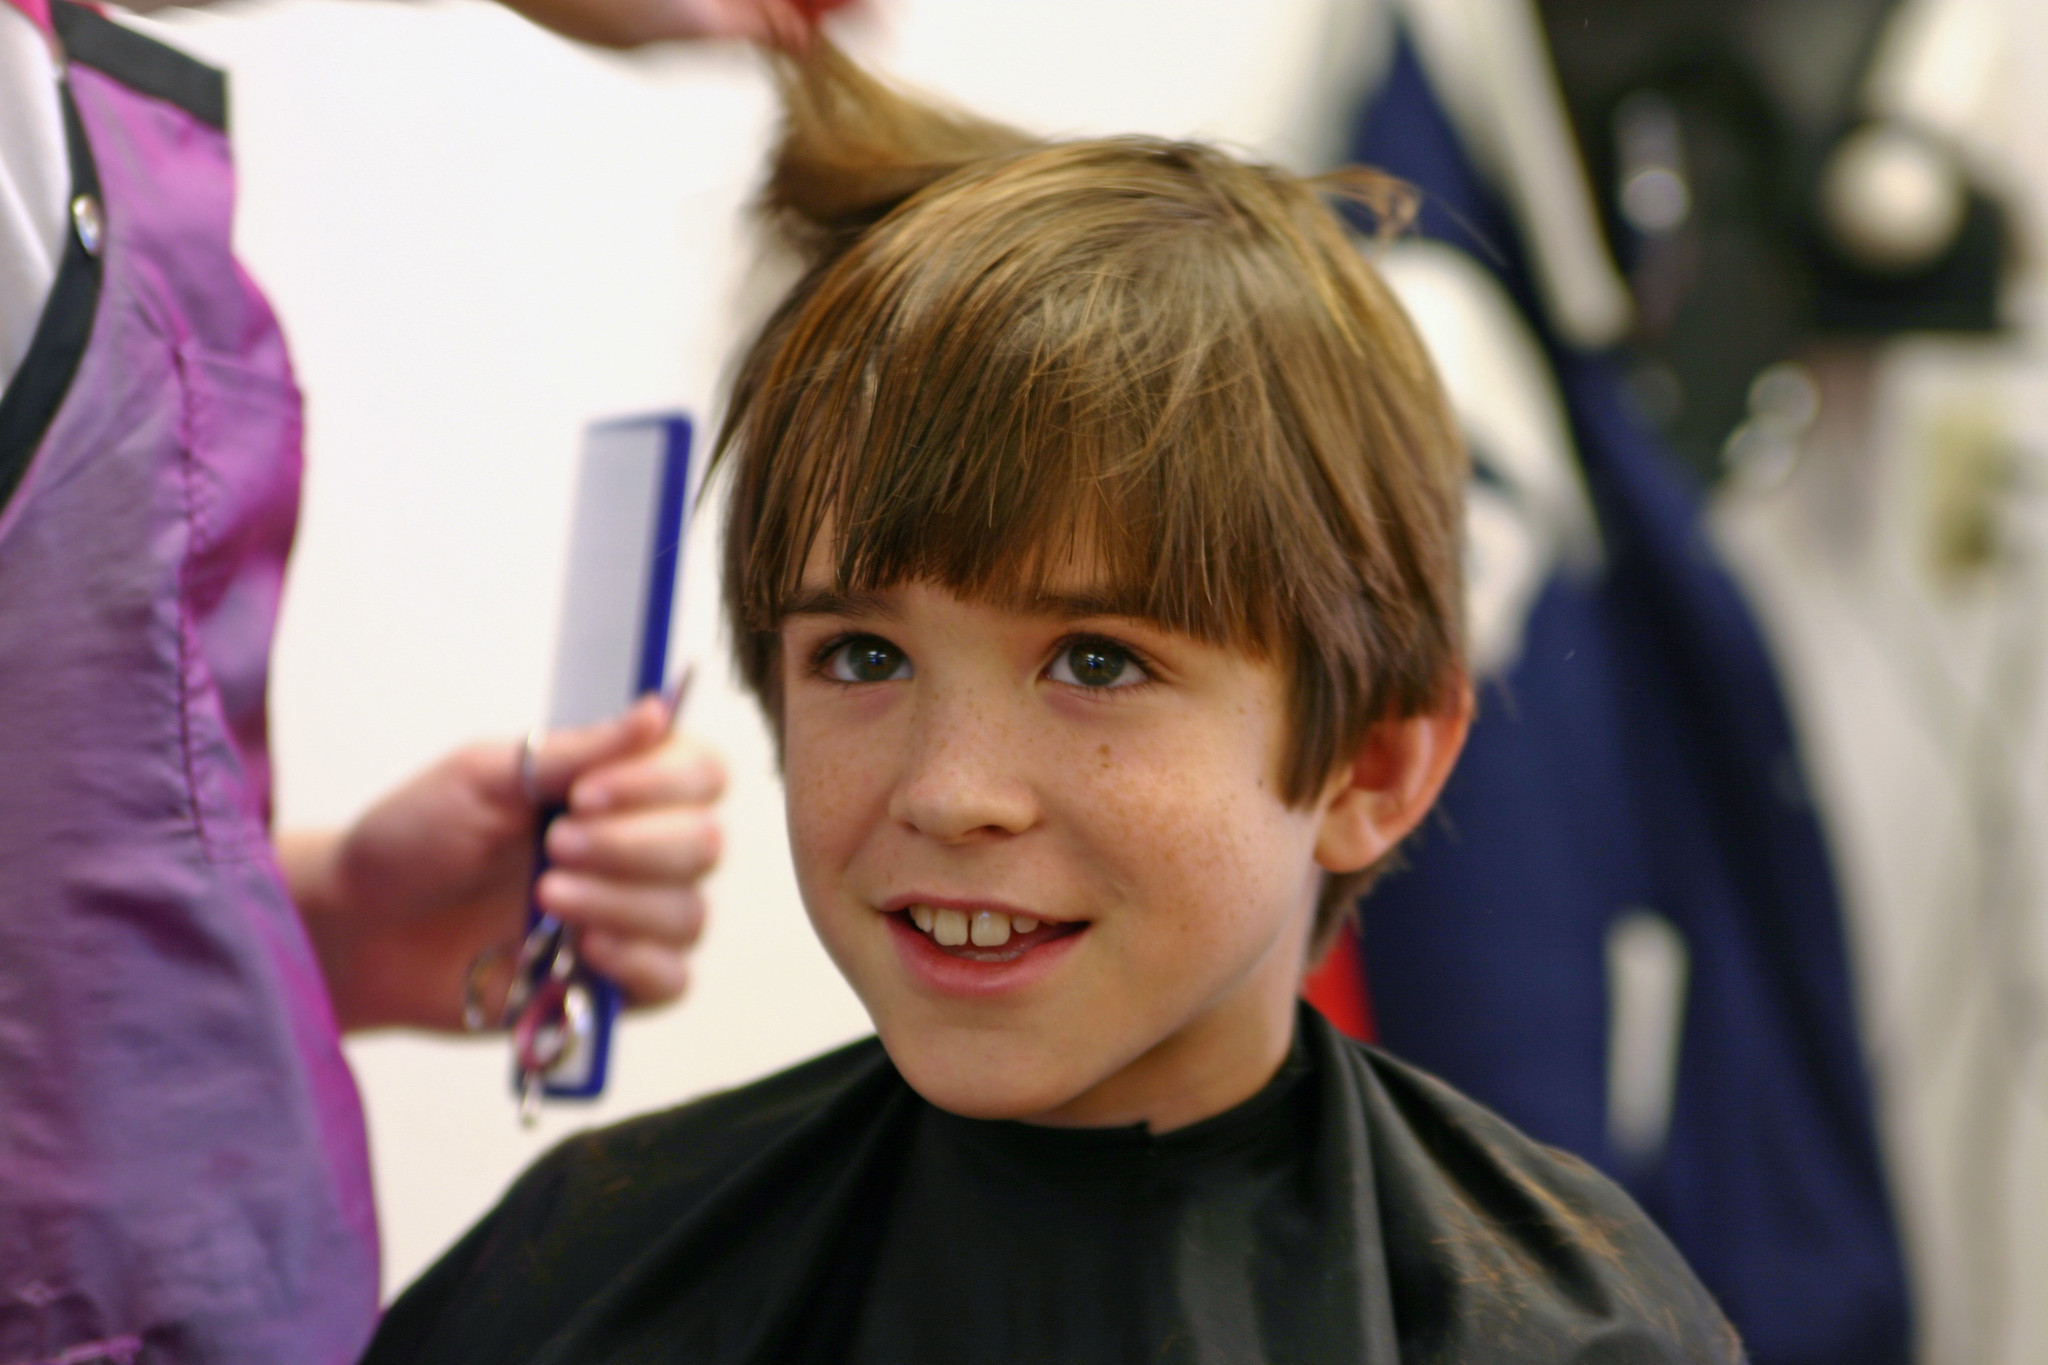 Free Kids Haircuts
 Back to school $10 haircuts for kids free $10 rewards at